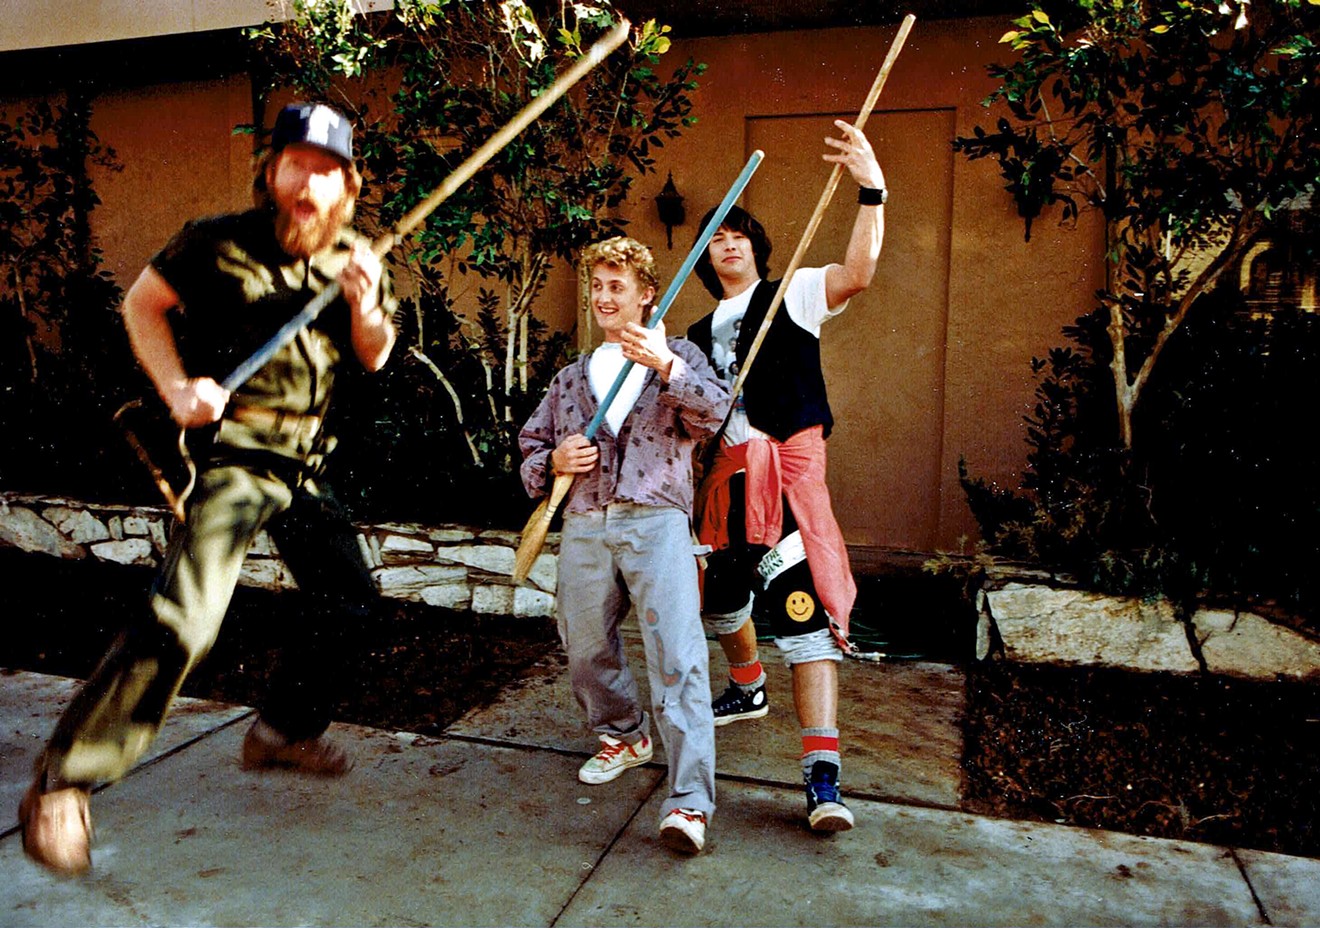 Alex Winter (center) and Keanu Reeves (right) clown around during the filming of "Bill & Ted's Excellent Adventure" in the Phoenix area.